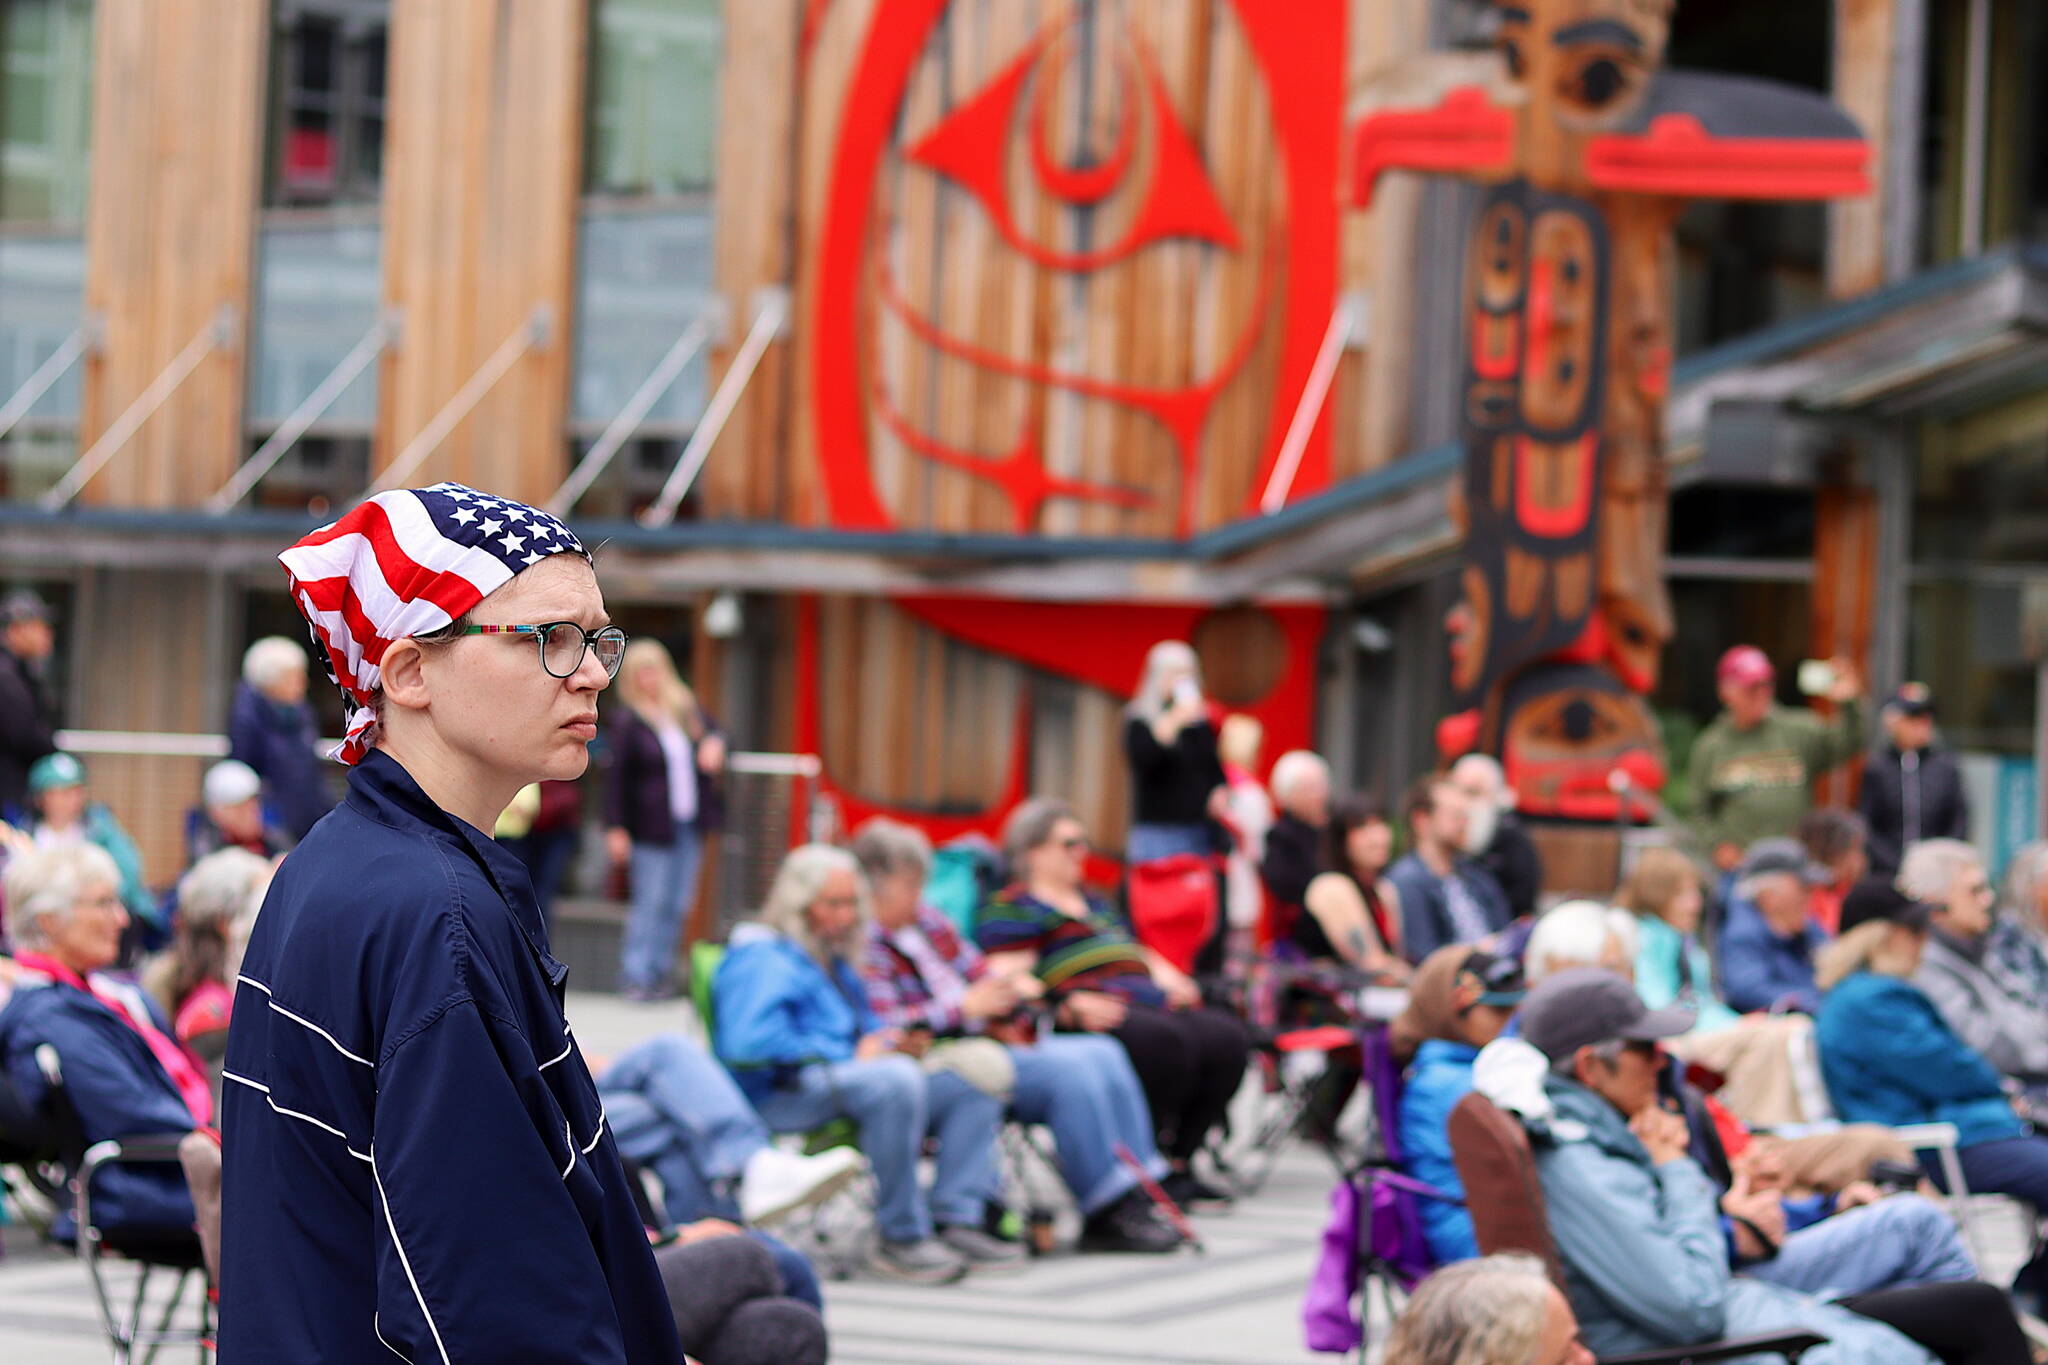 Tammi Birch watches an Independence Day Concert by the Juneau Volunteer Marching Band on Sunday at Sealaska Heritage Plaza. (Mark Sabbatini / Juneau Empire)